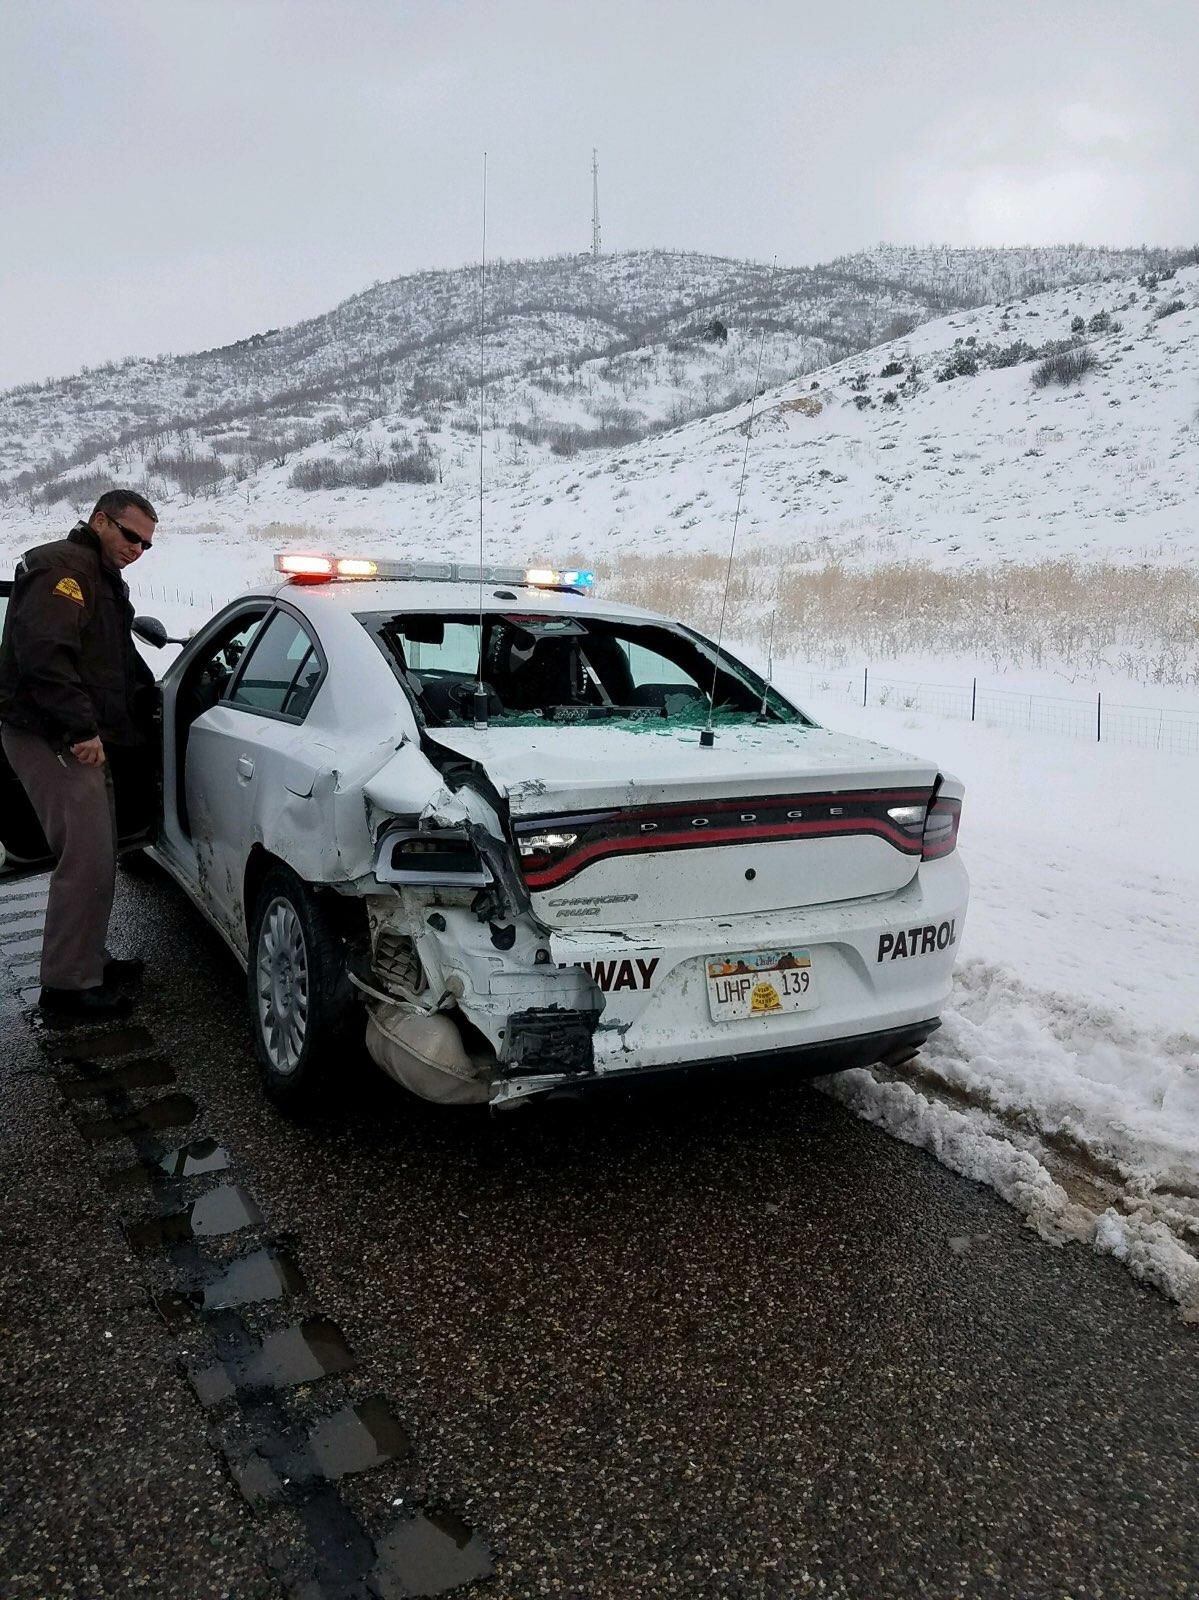 A UHP trooper's vehicle received significant damage when a car crashed into it on the road shoulder.